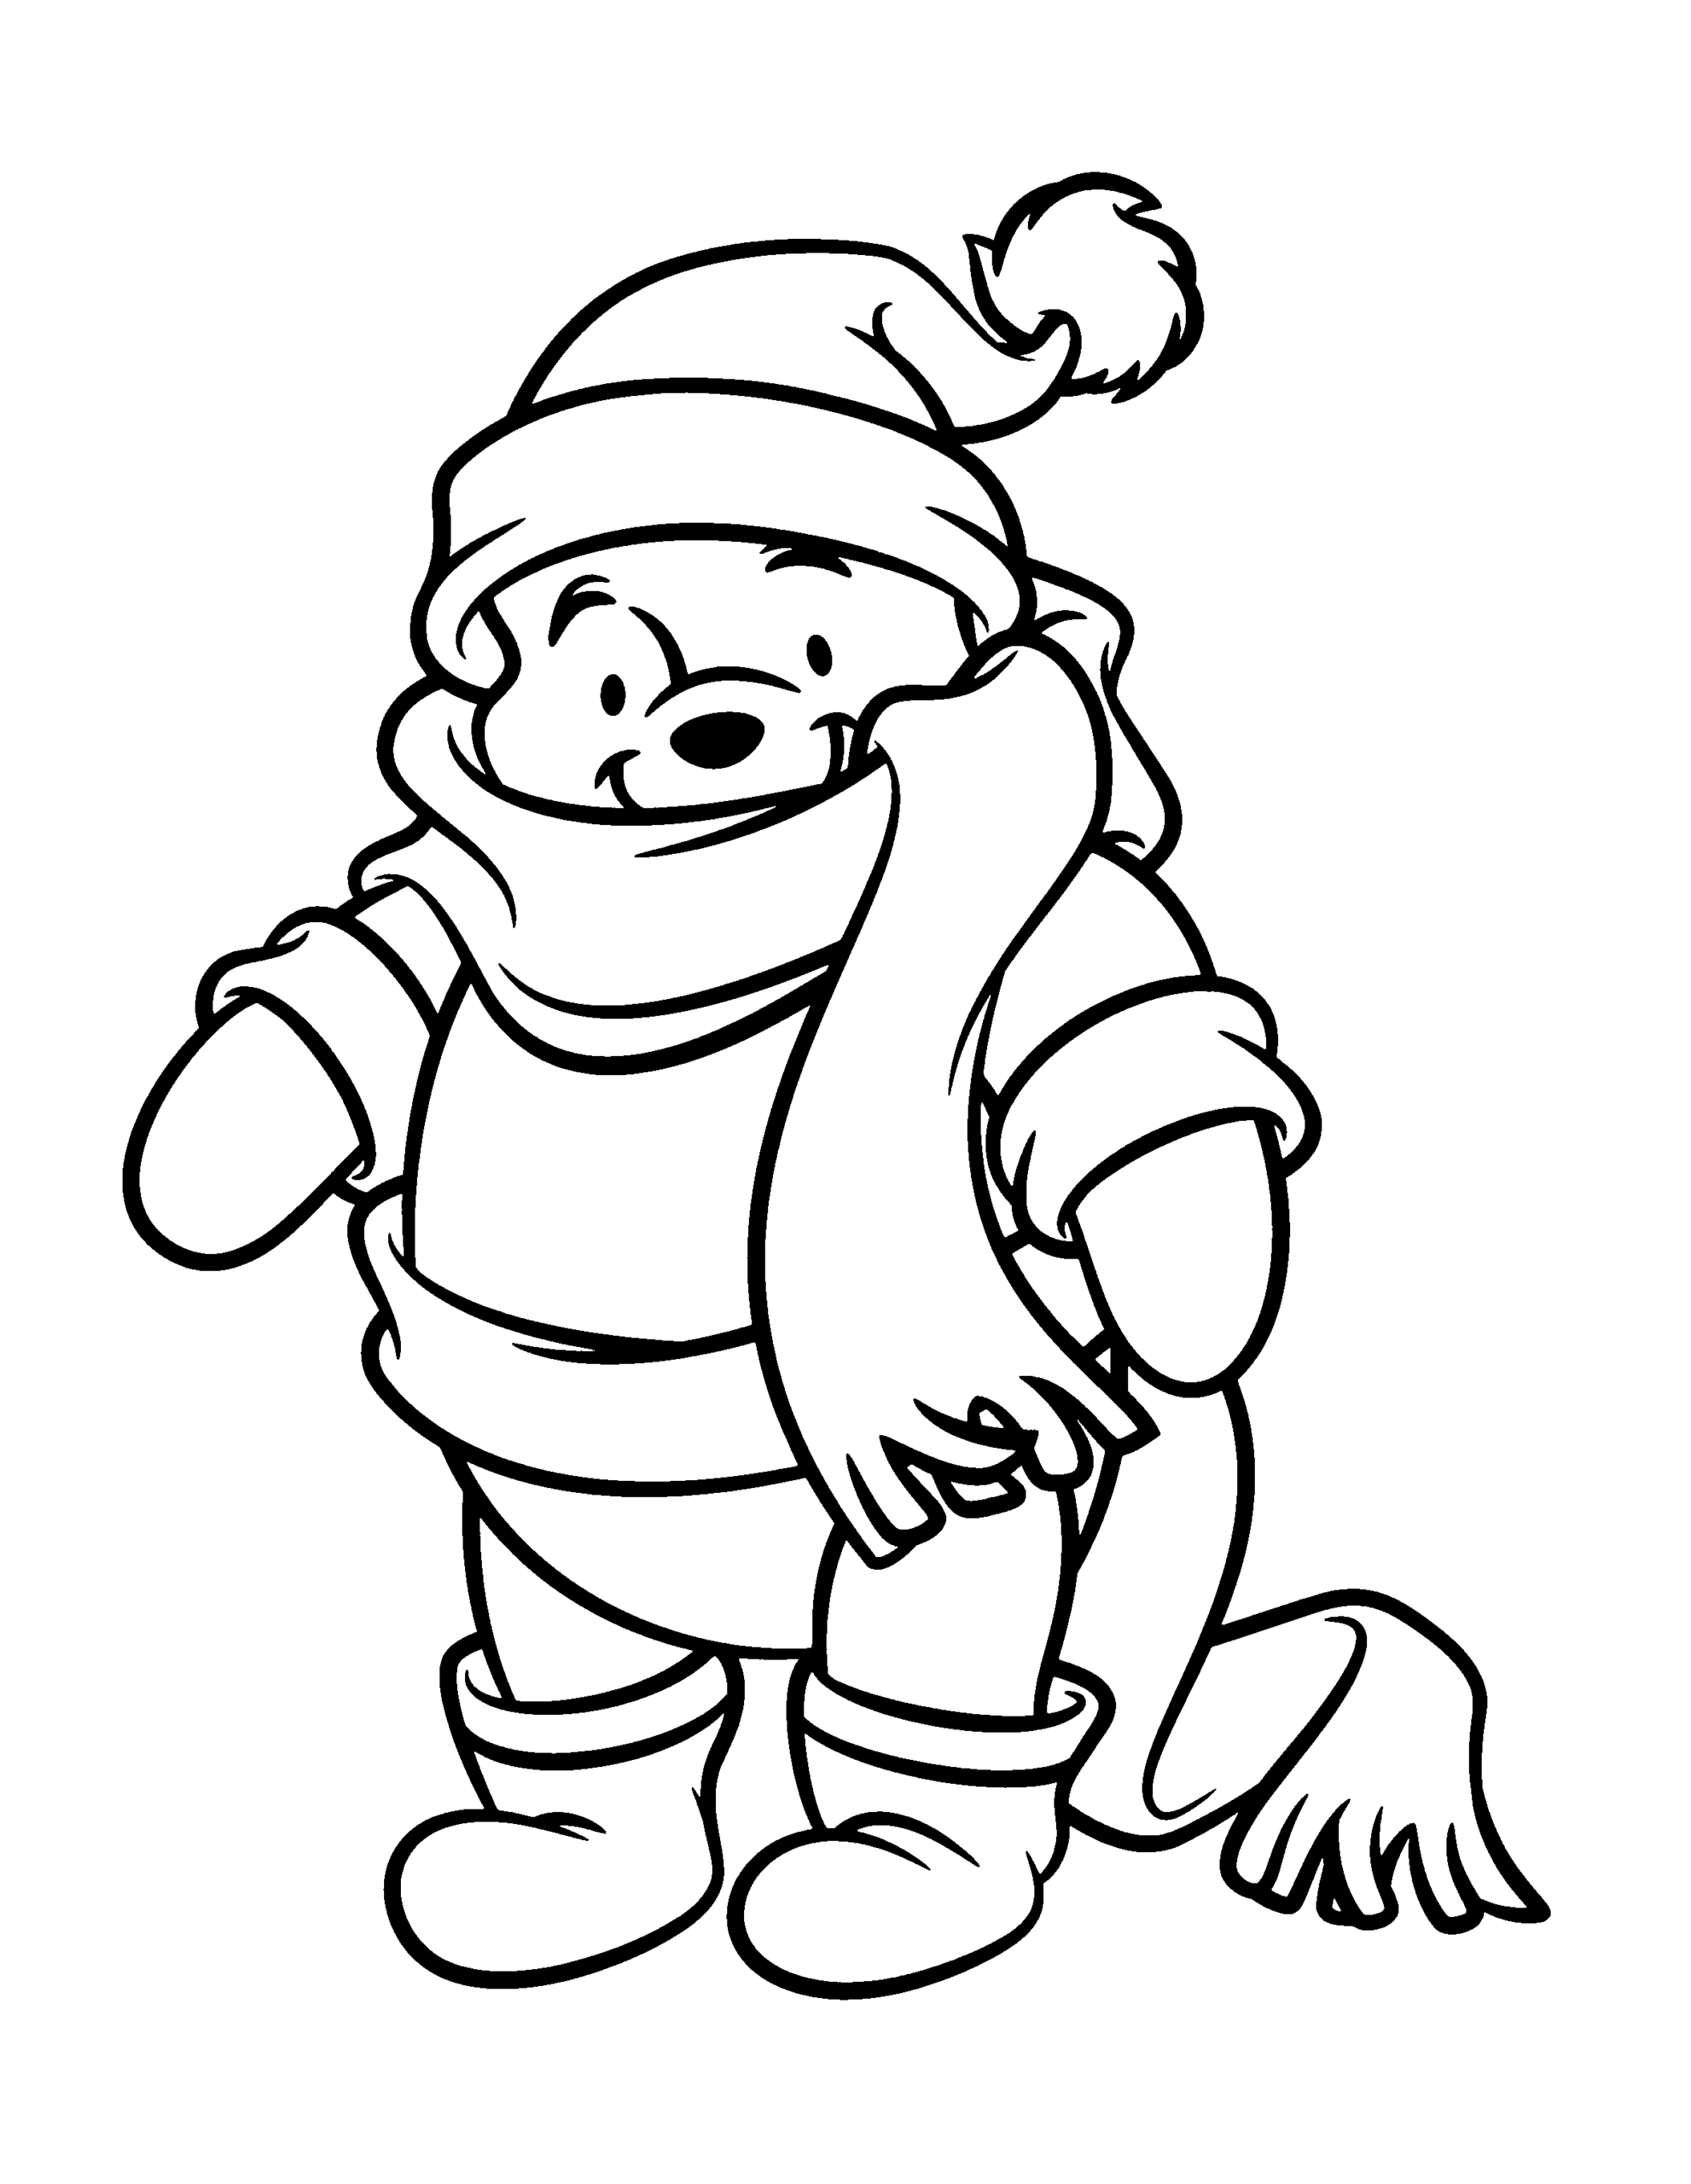 Winnie the Pooh Coloring Pages Cartoons winnie the pooh 78 Printable 2020 7197 Coloring4free